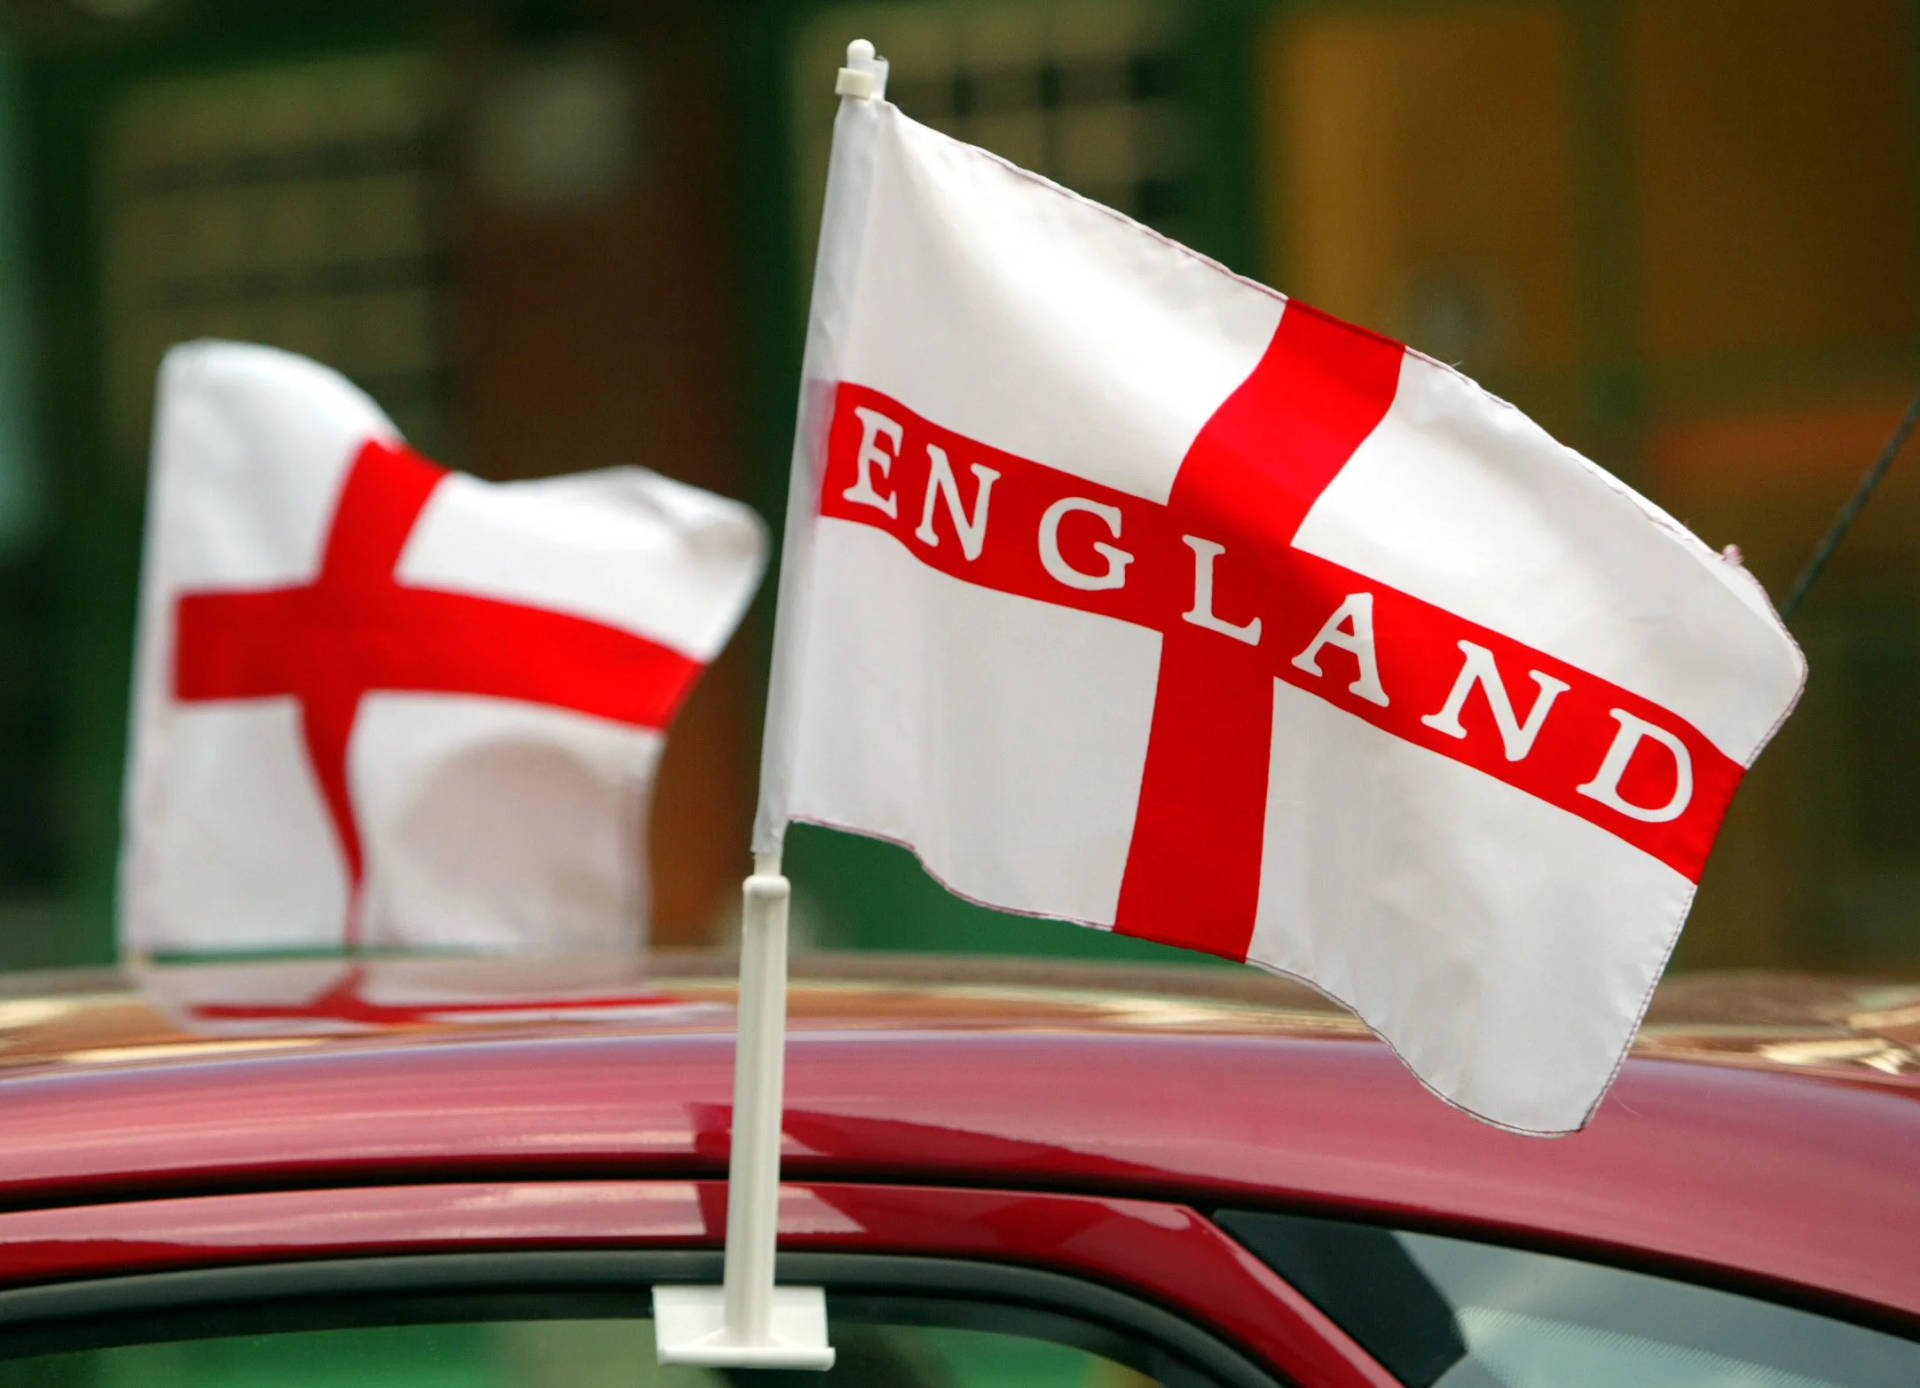 Engaging Display Of The England Flag Fluttering Against The Clear Sky Background